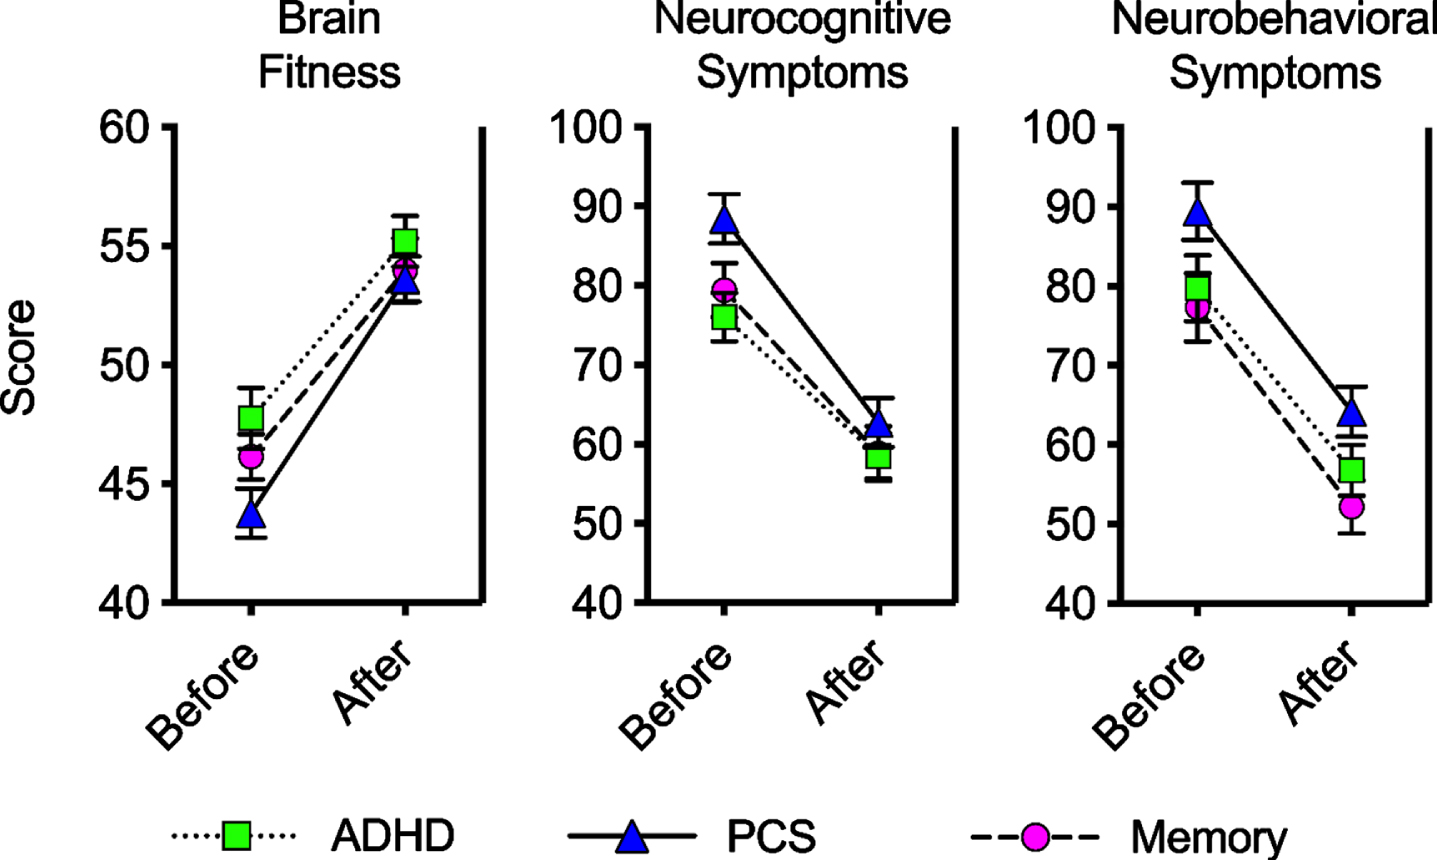 Mean scores before and after treatment on in-house tests. For patients in the ADHD, PCS, and memory diagnosis groups, mean test scores are shown before and after the Brain Fitness Program (error bars are standard error of the mean). Brain Fitness scores can range from 15 to 75, and an increase in score indicates improvement. Scores on the Neurocognitive Symptoms scale range from 15 to 150, and a decrease in score indicates improvement. Scores on the Neurobehavioral Symptoms scale range from 20 to 200, and a decrease in score indicates improvement. In all cases, the mean change in score from pre- to post-program (Table 2) was a significant score improvement.